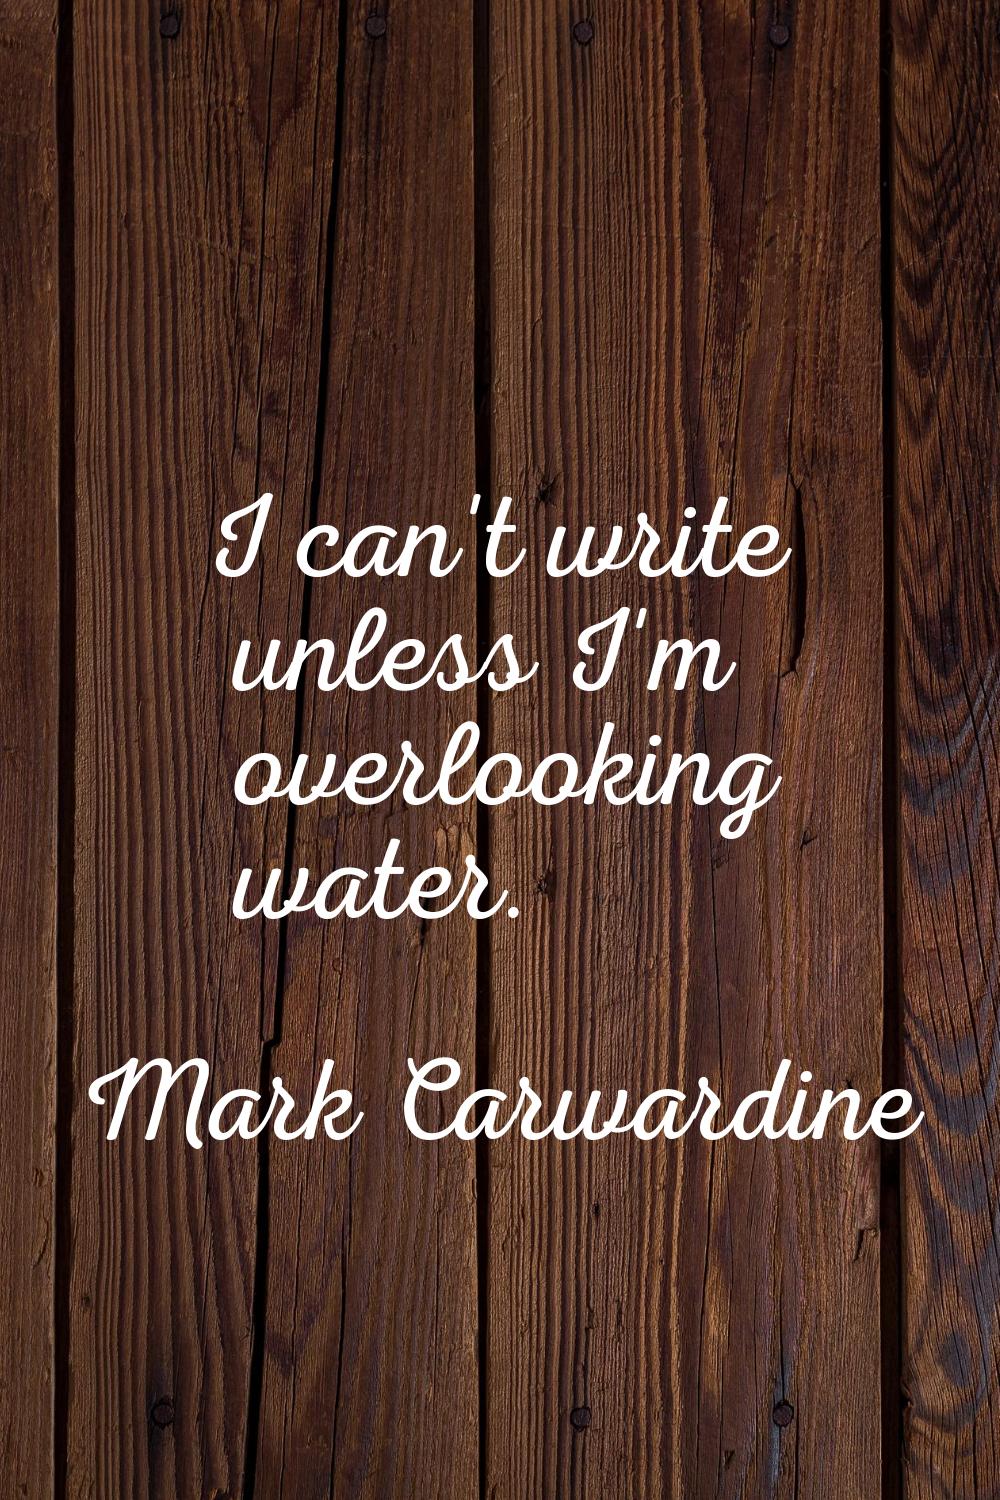 I can't write unless I'm overlooking water.